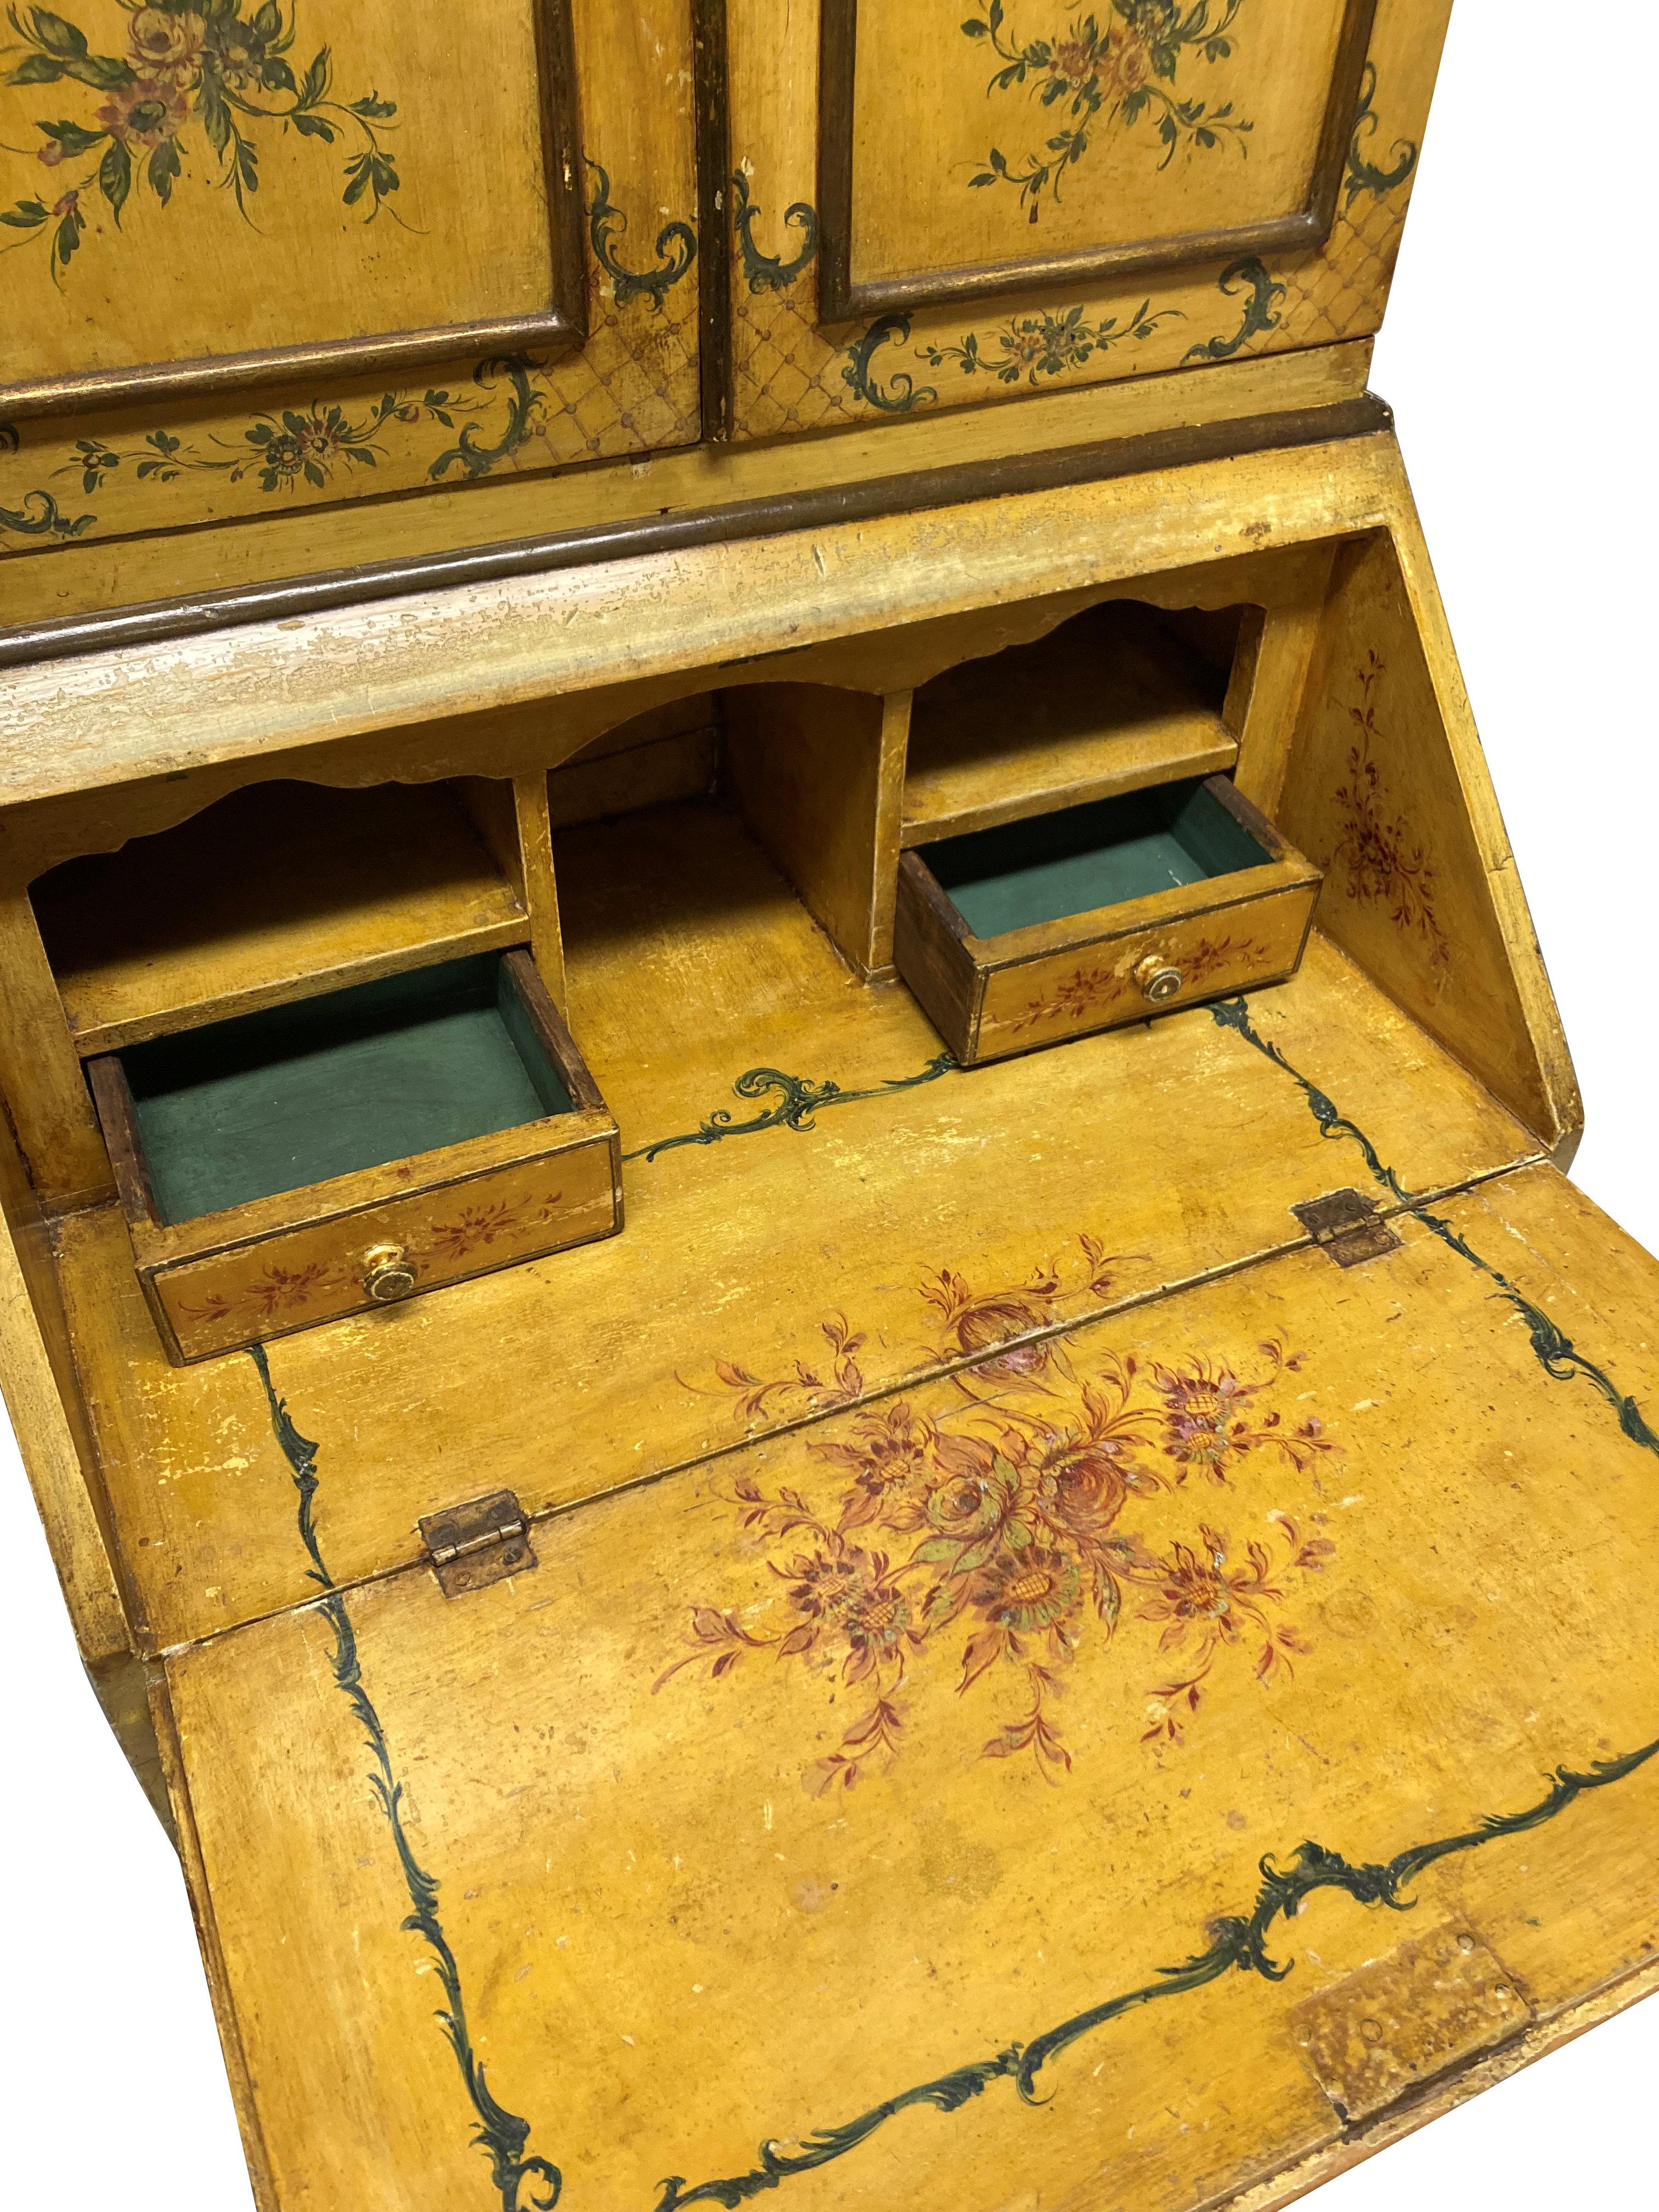 A late 19th Century Venetian secretaire cabinet in a striking yellow lacquer, with beautifully hand painted decoration throughout. With four drawers beneath the fall front desk and the upper cabinet with four shelves, painted aquamarine, with an